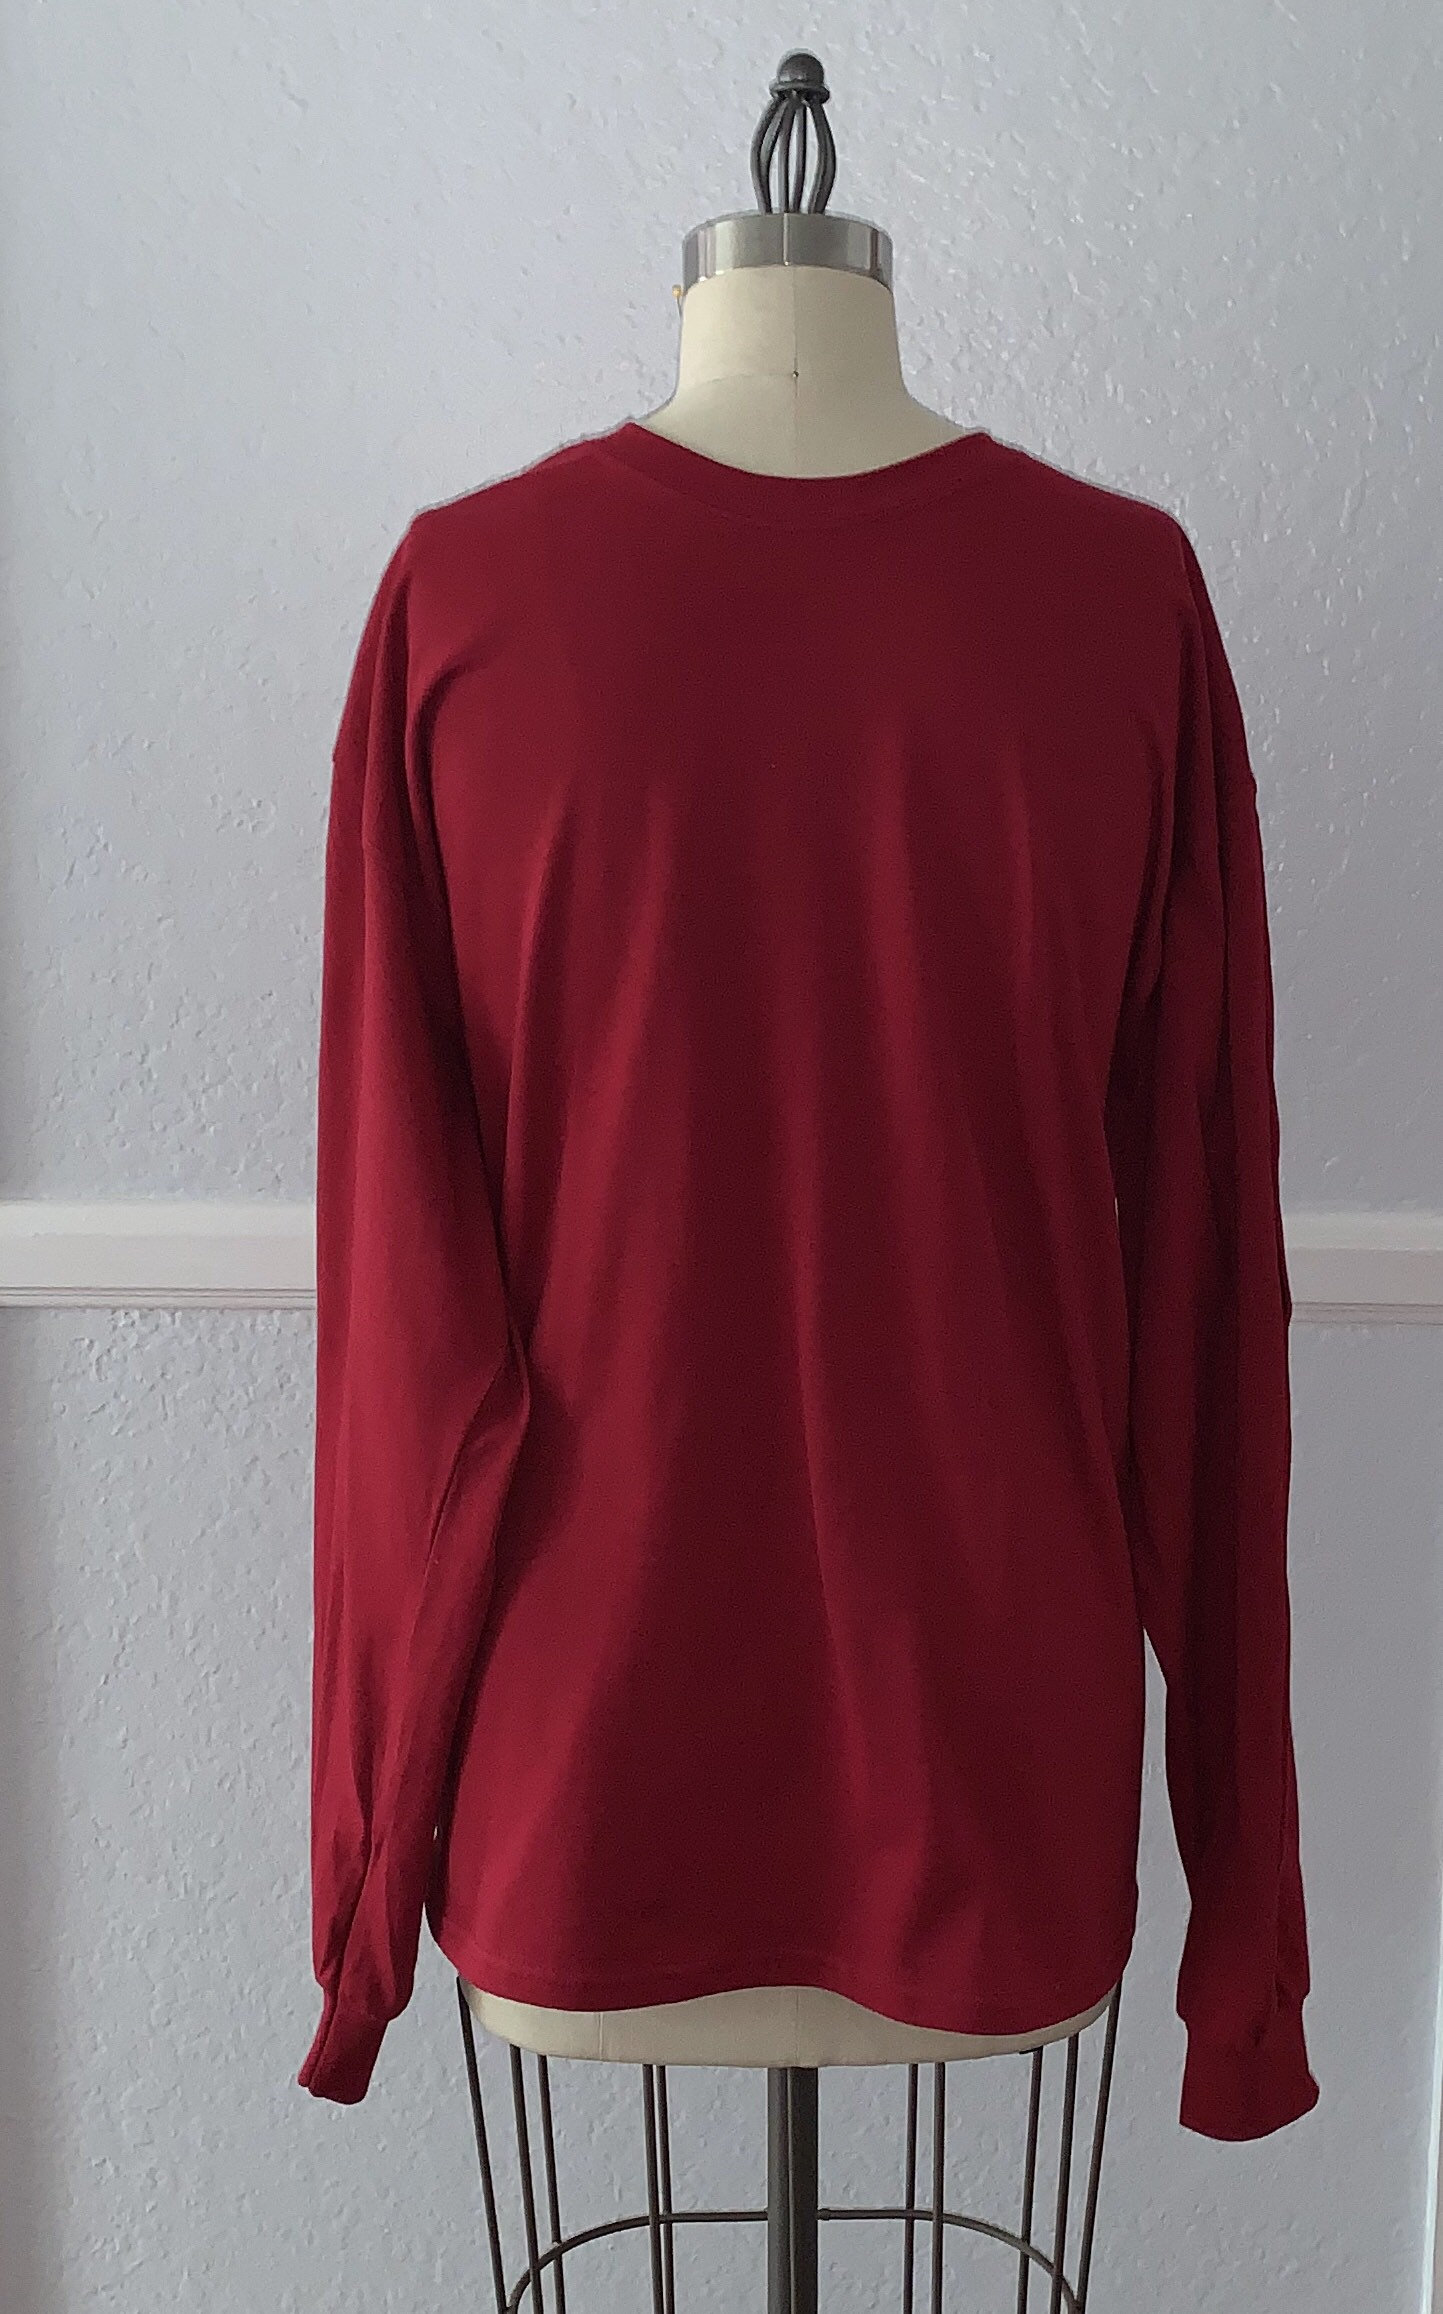 SMLXL Post Surgery/rehab/ Cardinal Red/ Long Sleeves Unisex - Etsy